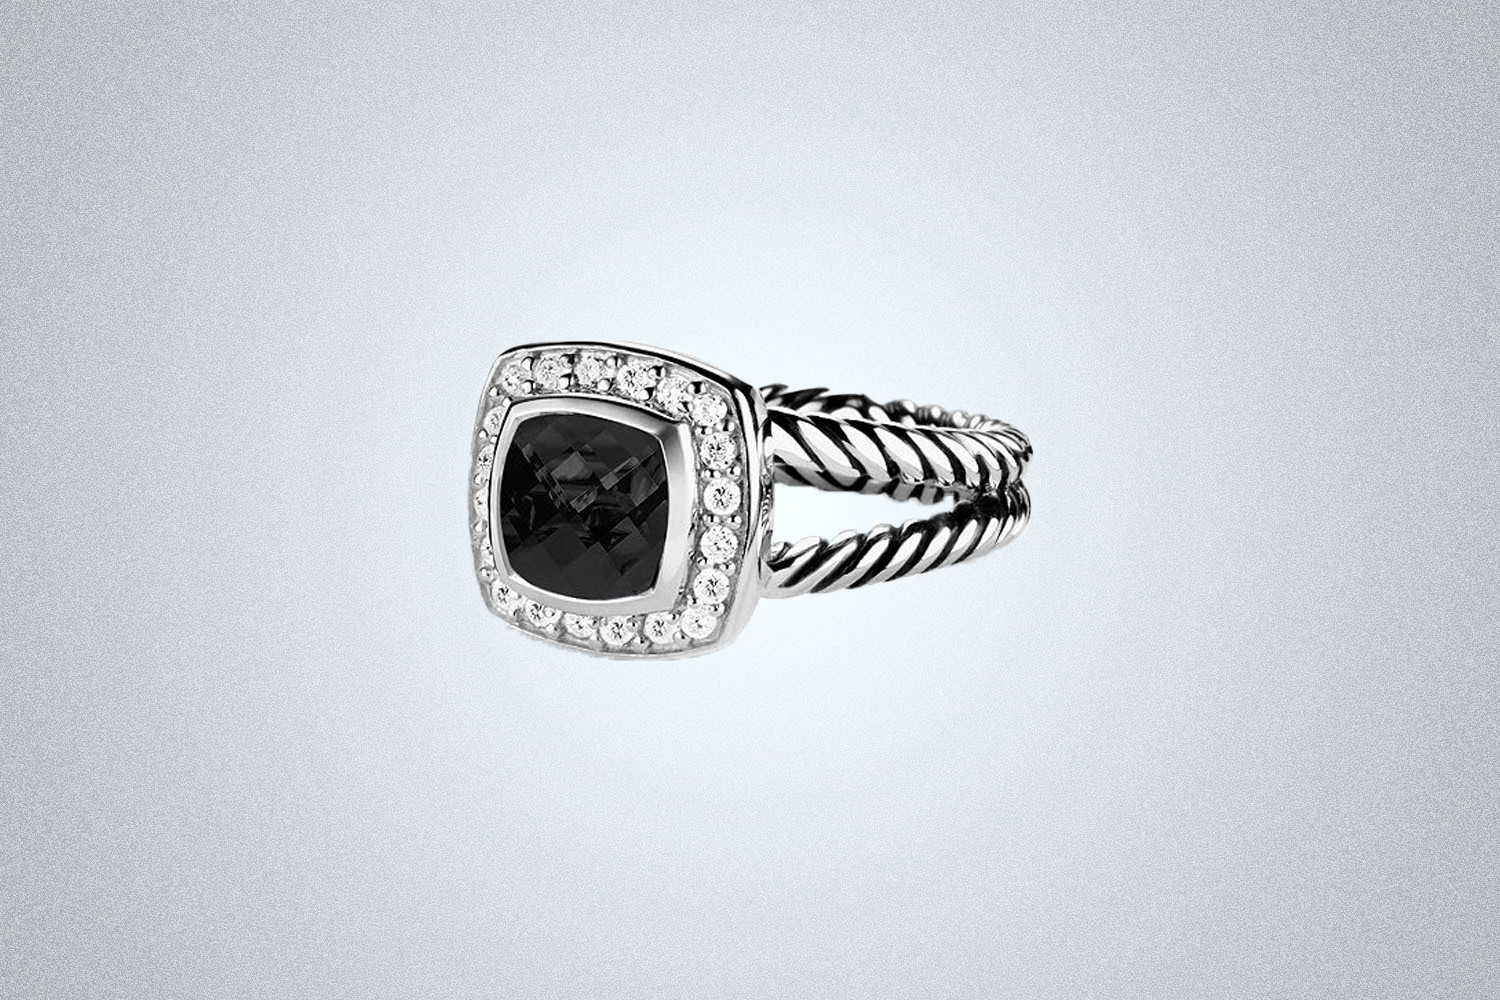 The David Yurman Petite Albion Ring is the best luxury grad gift to buy in 2022